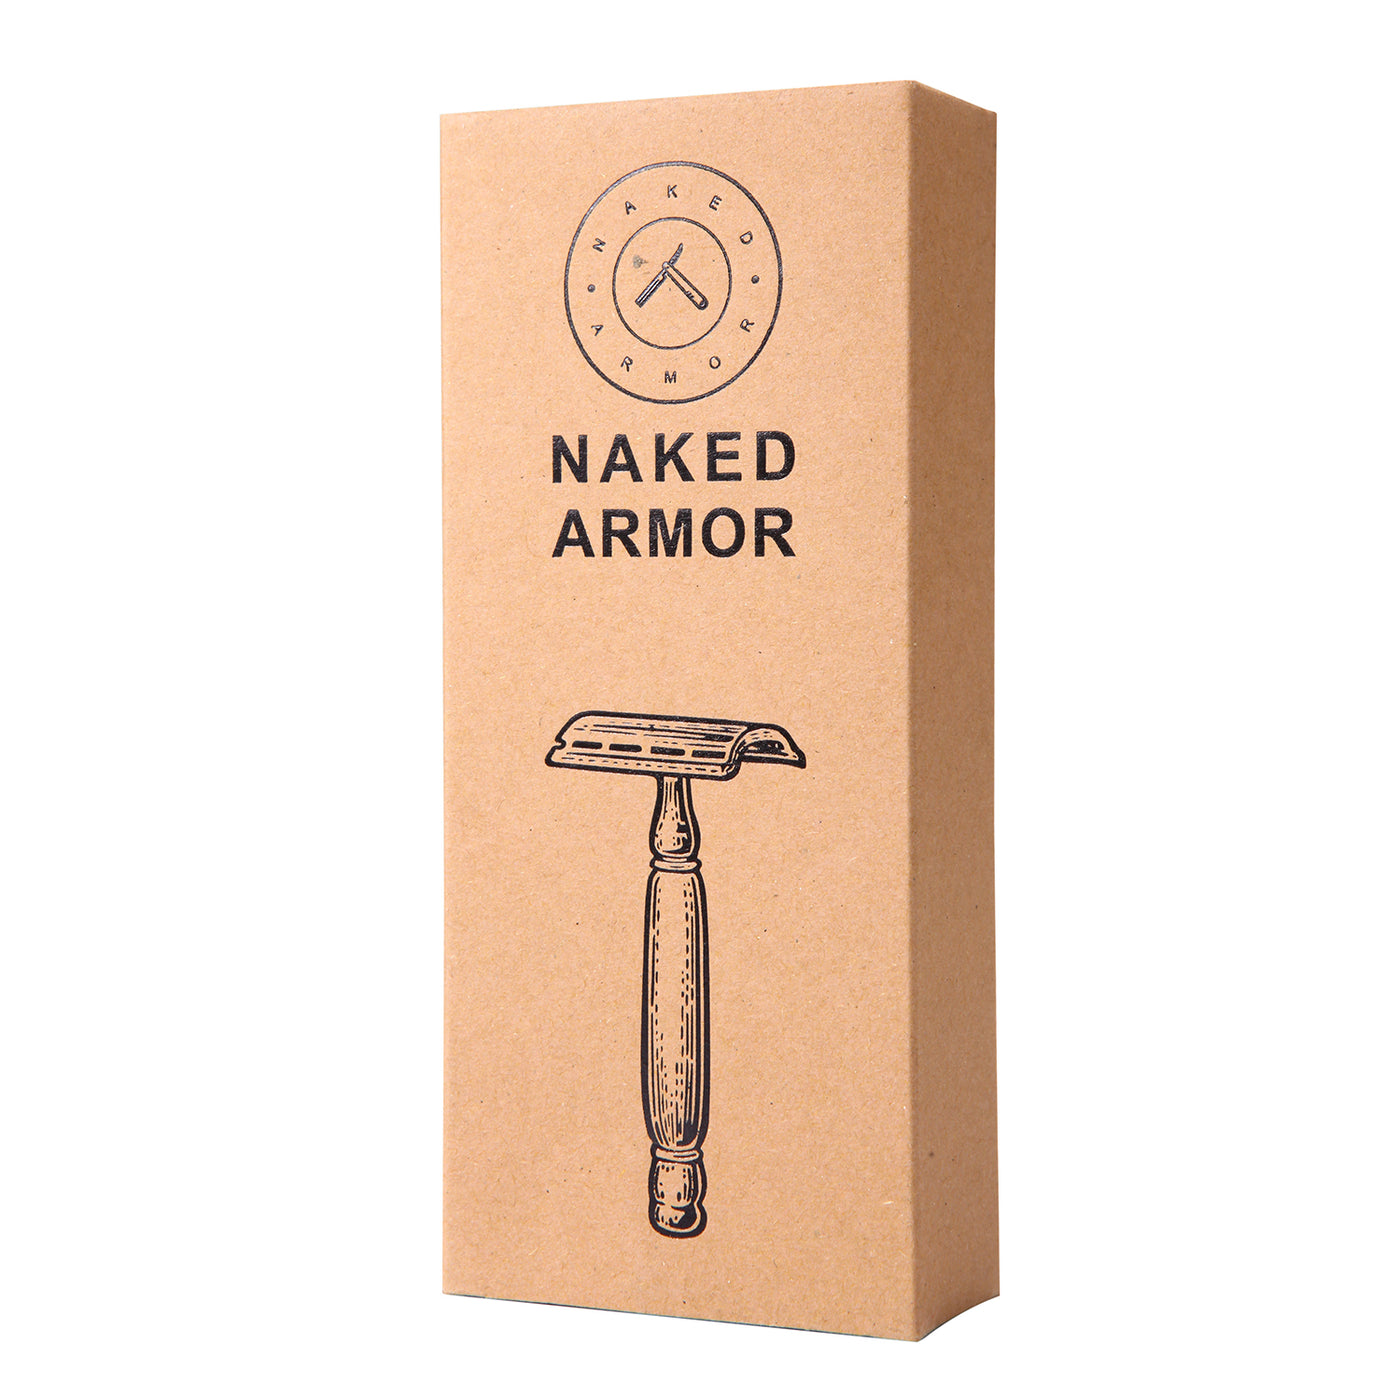  Aglovale Closed Comb Safety Razor by Naked Armor sold by Naked Armor Razors